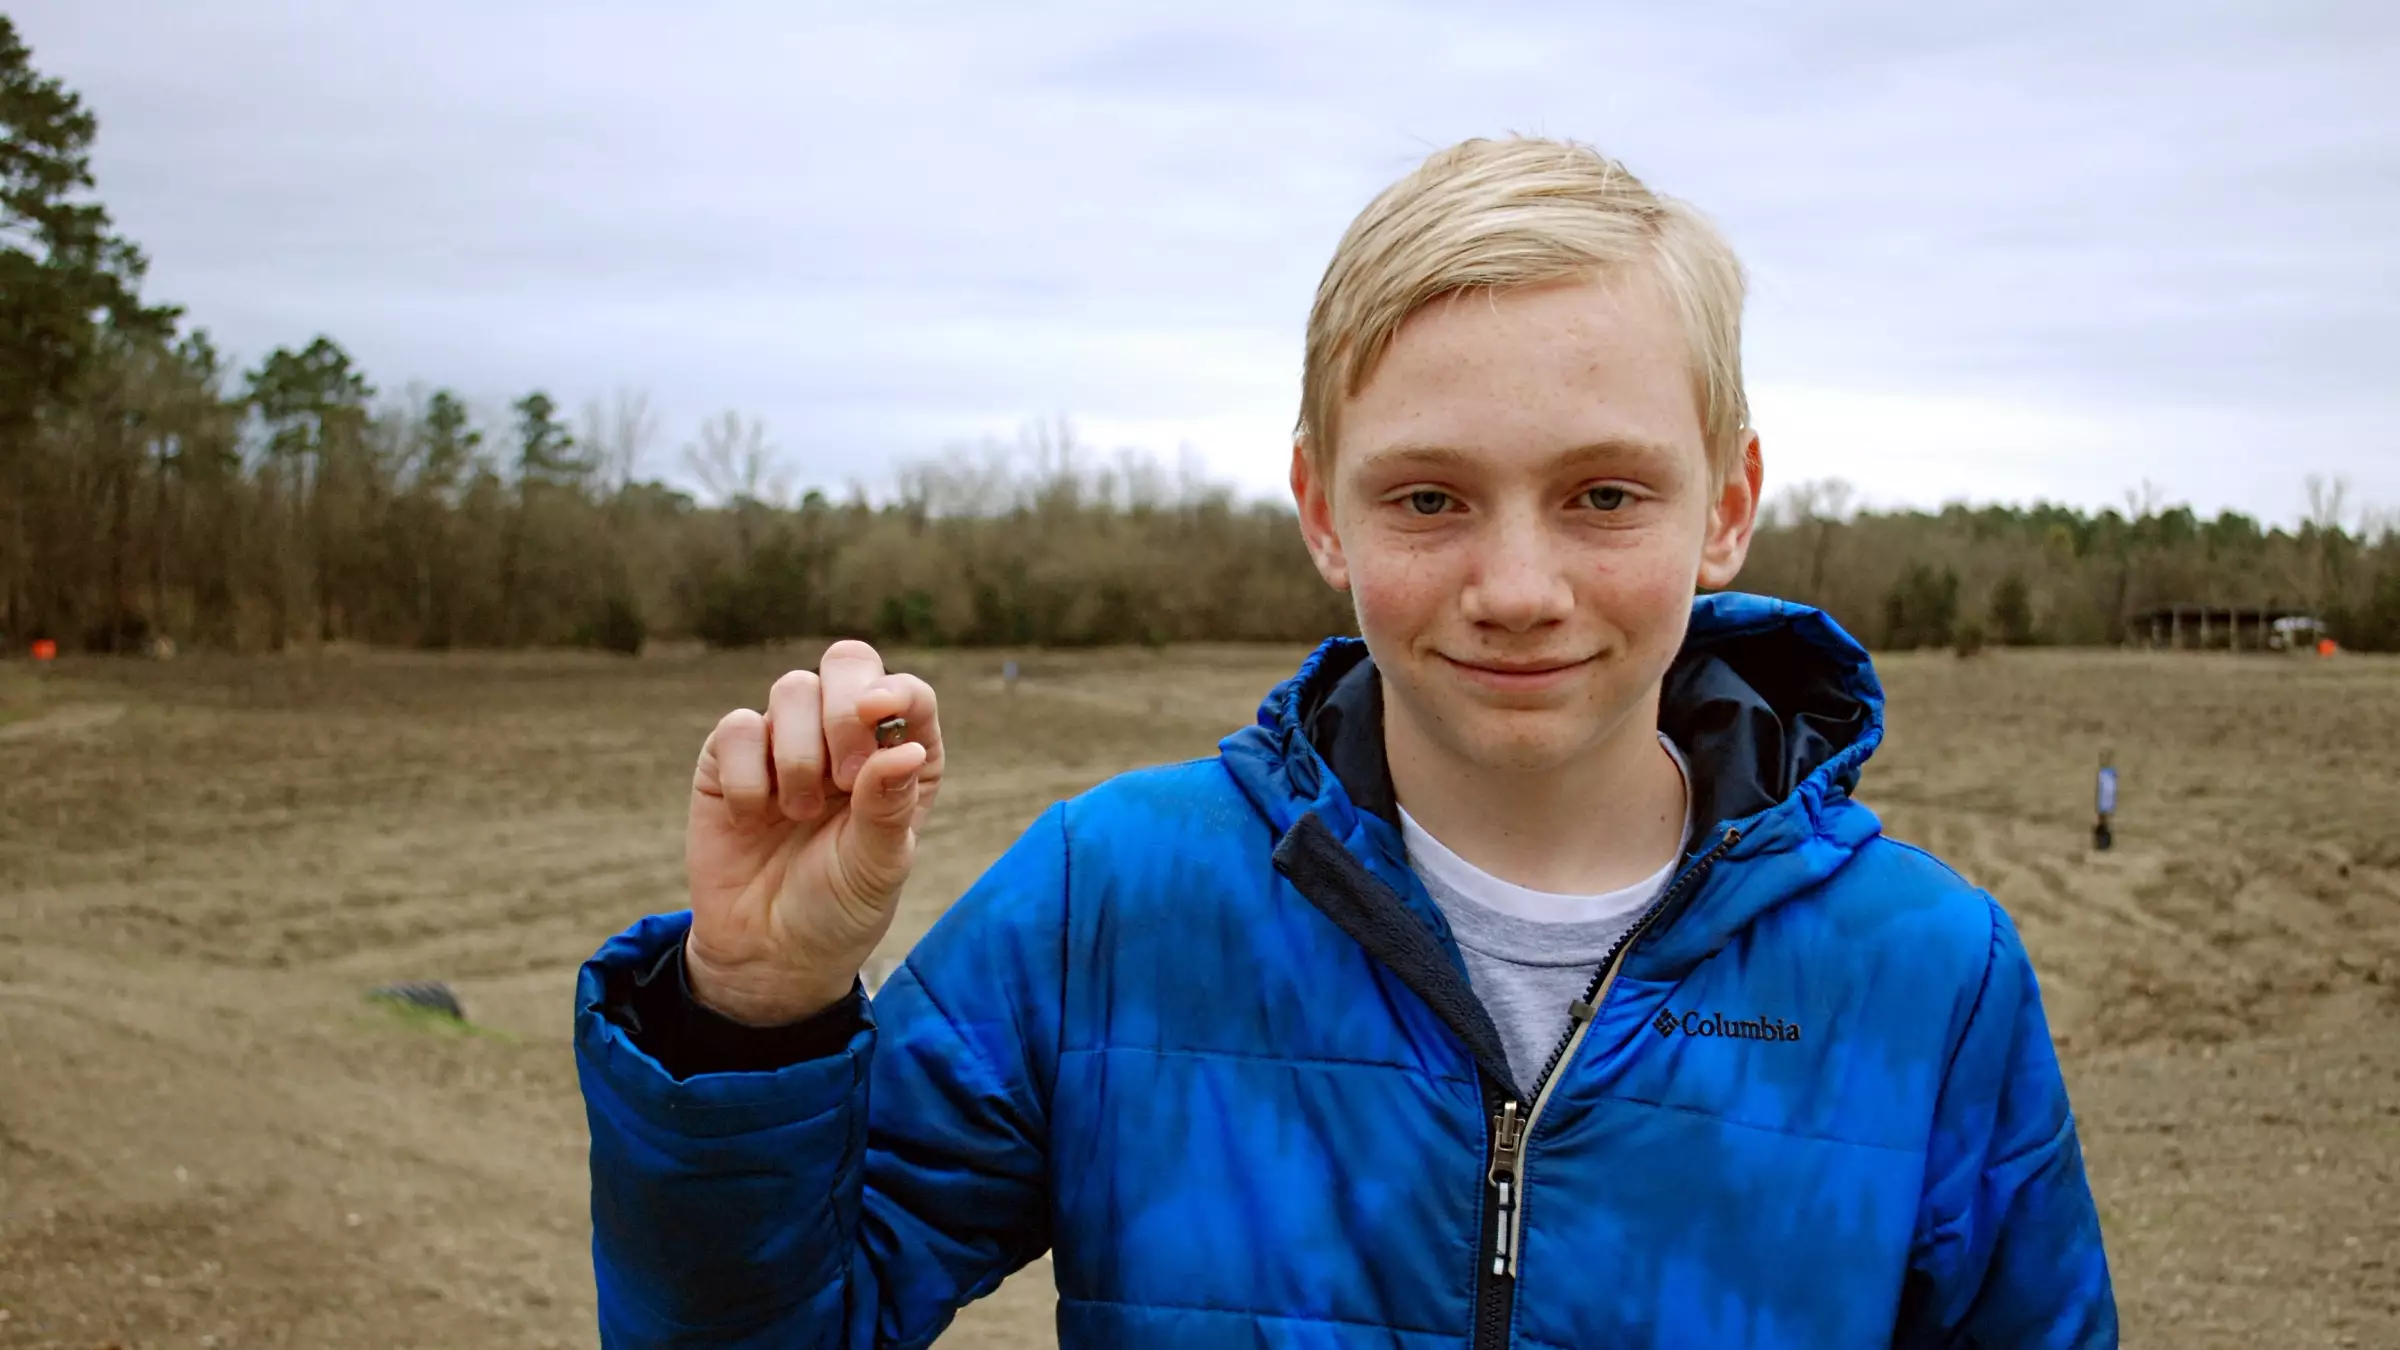 American Teenager Fulfils His Dream By Finding A Big Diamond In State Park 